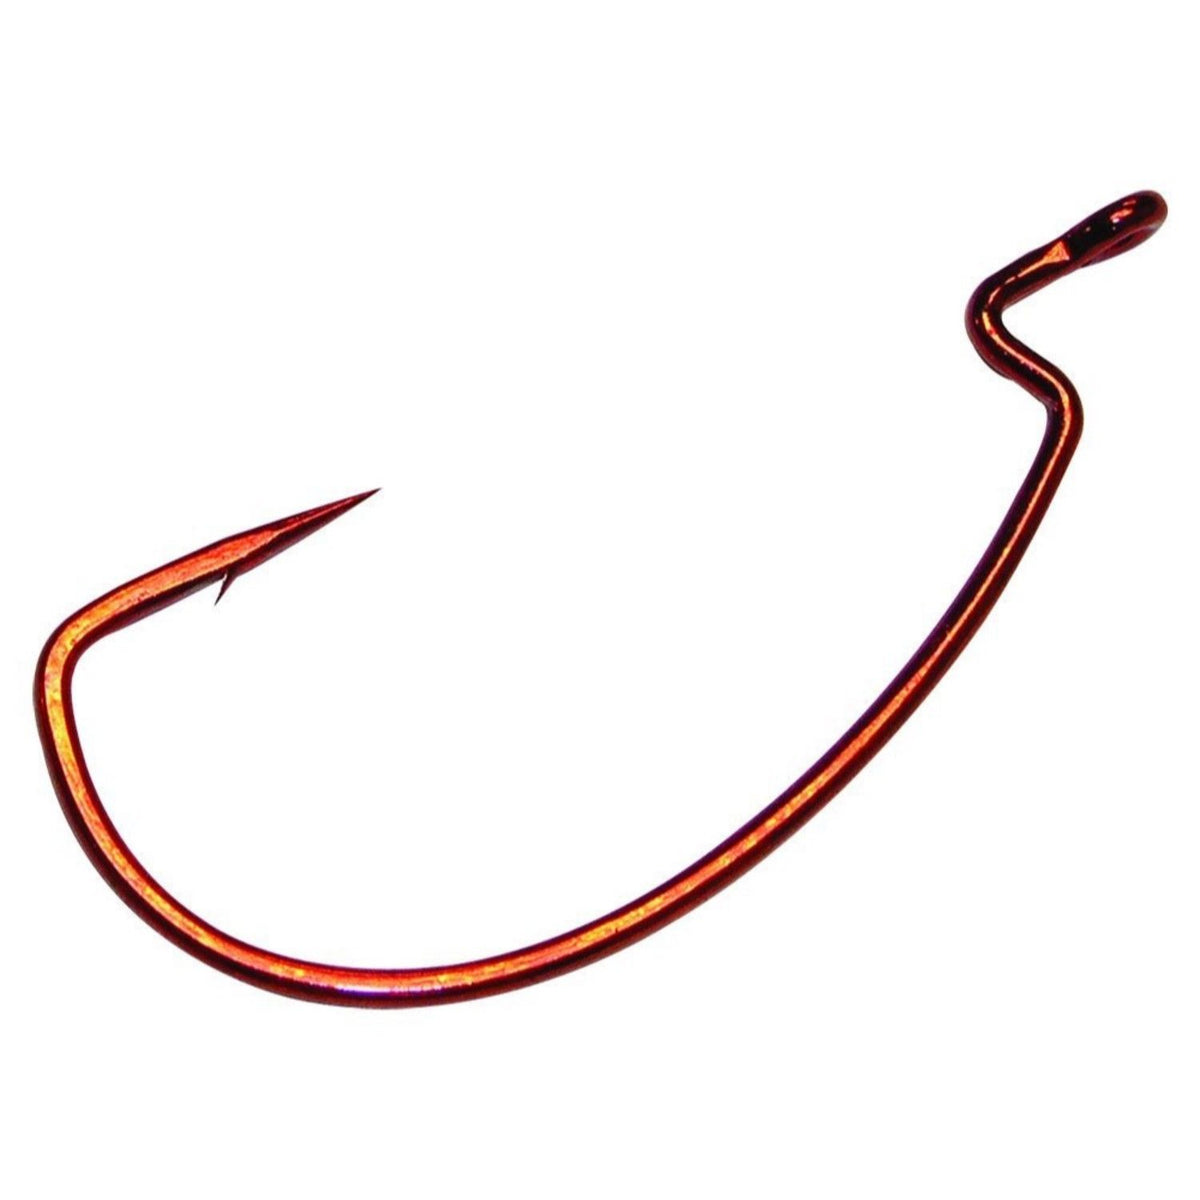  Toasis Fishing EWG Offset Worm Hook Assorted Sizes Pack of 50  (#1) : Sports & Outdoors